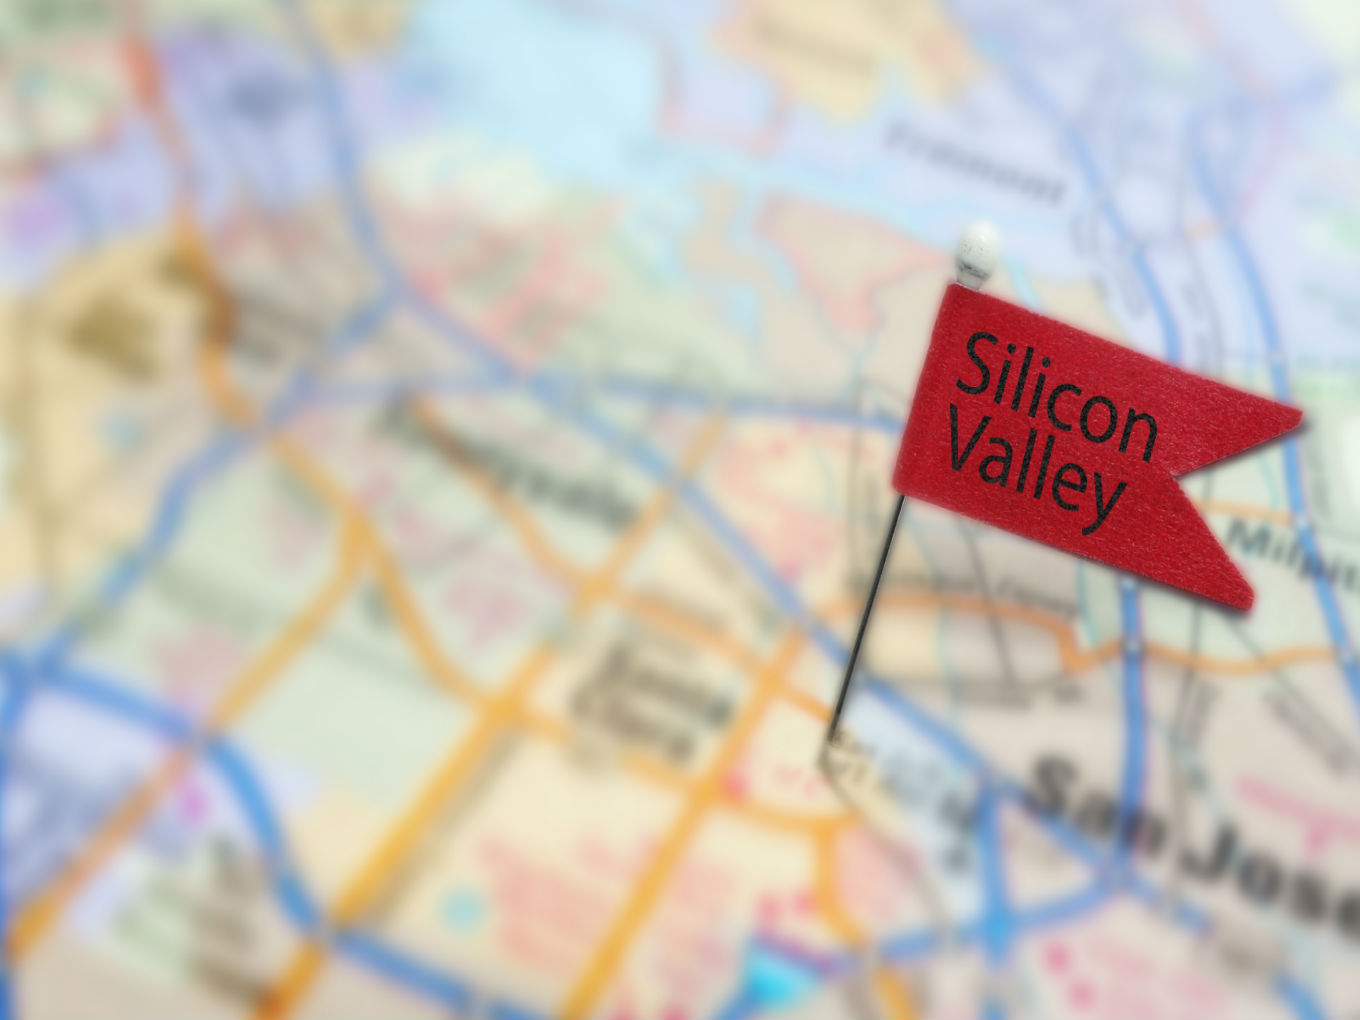 What The World Shouldn’t Learn From Silicon Valley